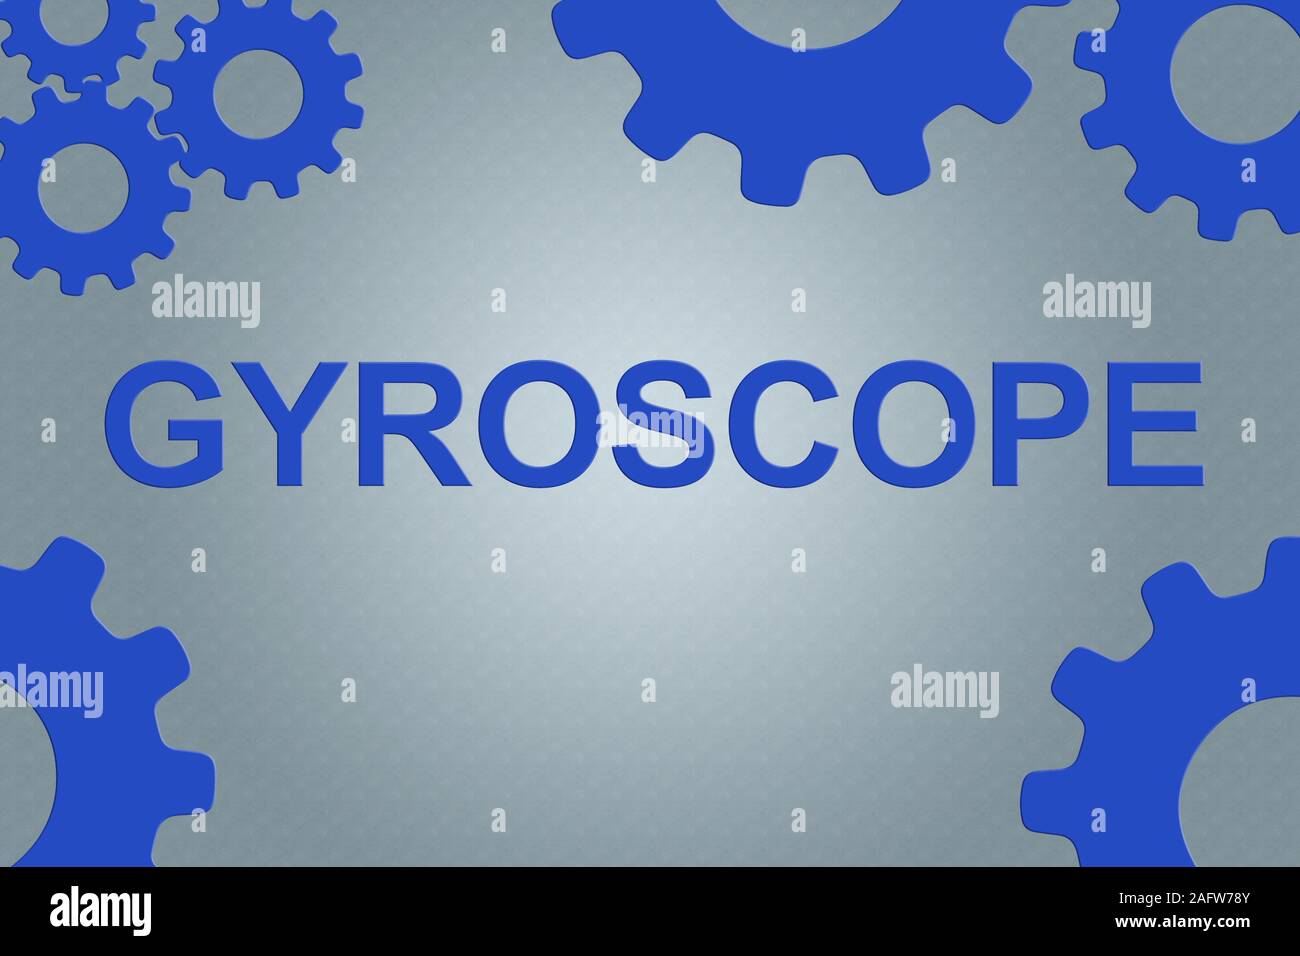 GYROSCOPE sign concept illustration with blue wheel figures on gray gradient background Stock Photo